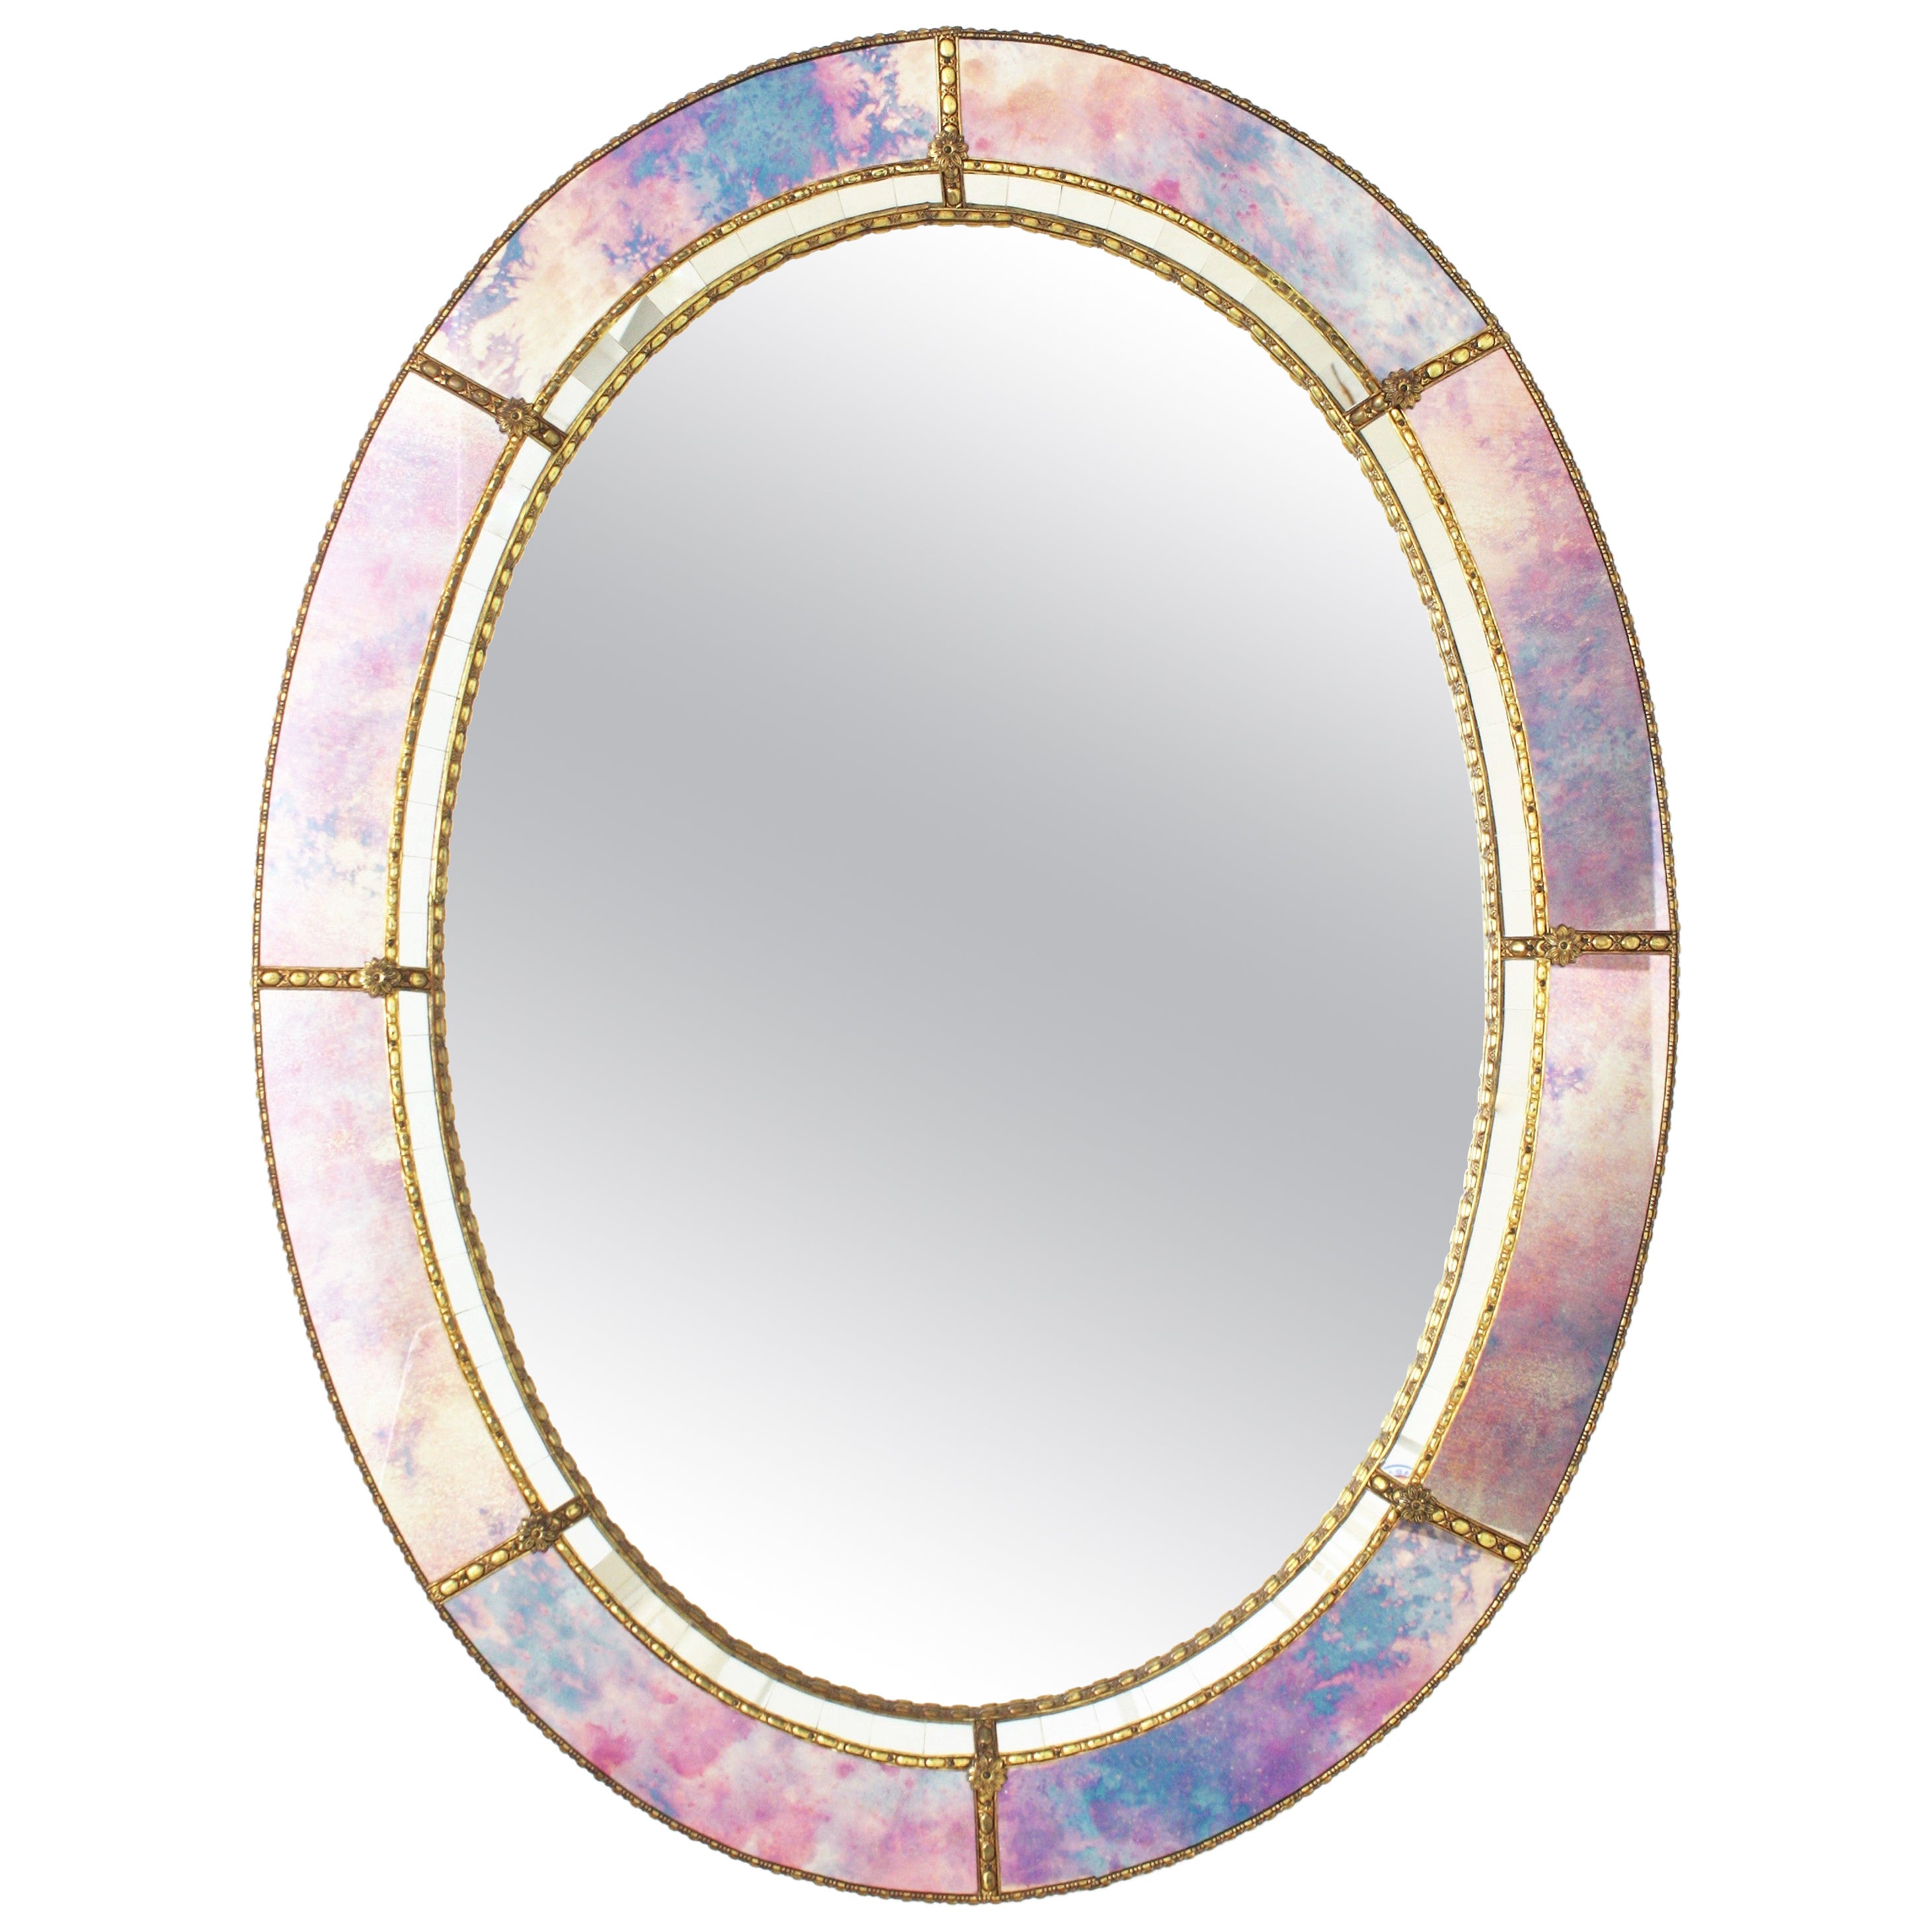 Oval Venetian Style Mirror with Brass Details